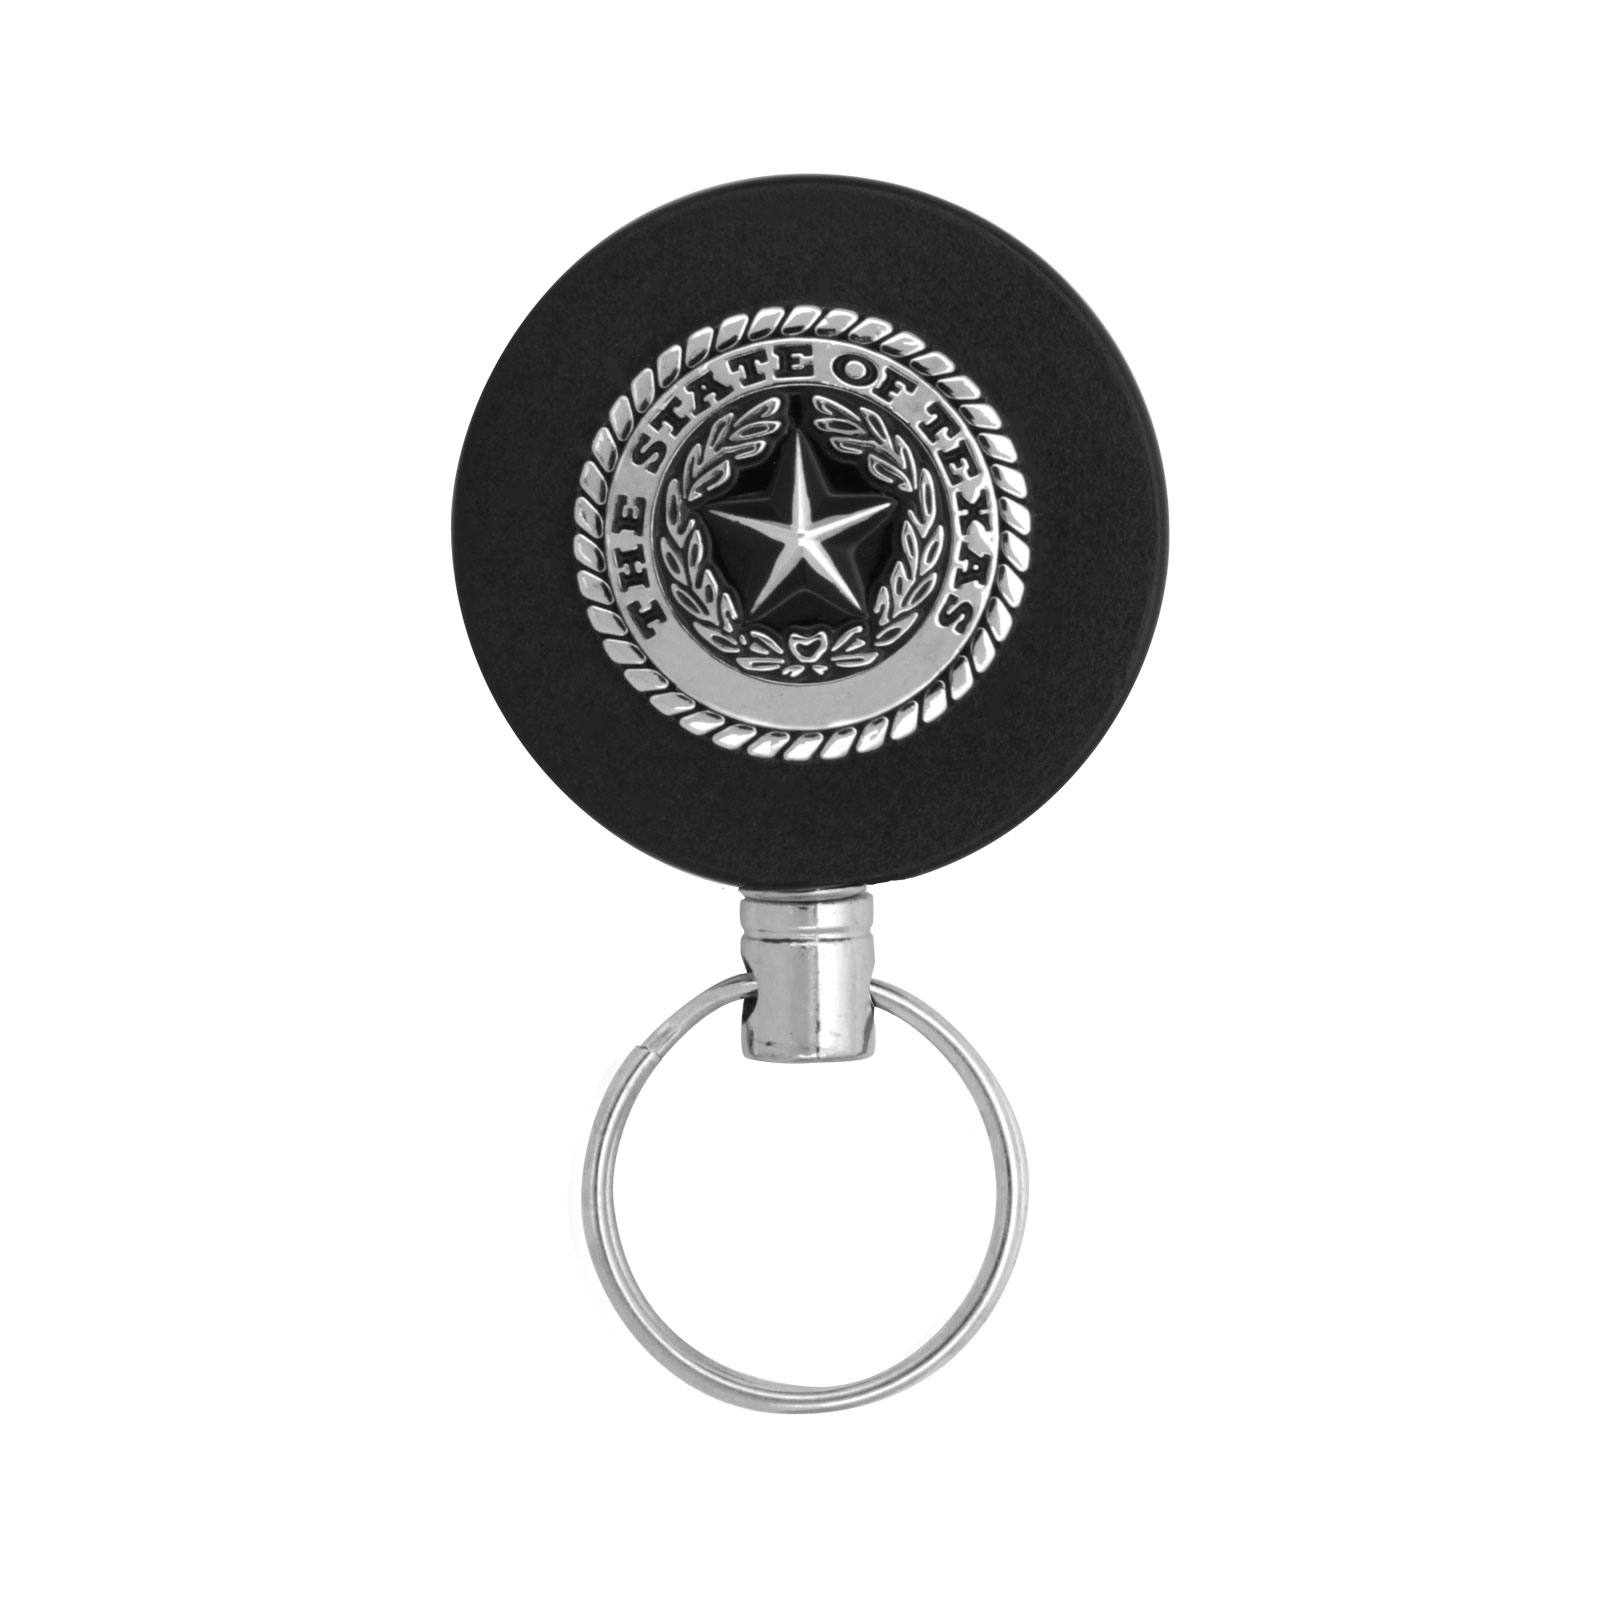 Promotion Gift double side badge holder with pen retractable badge reel  ball pen